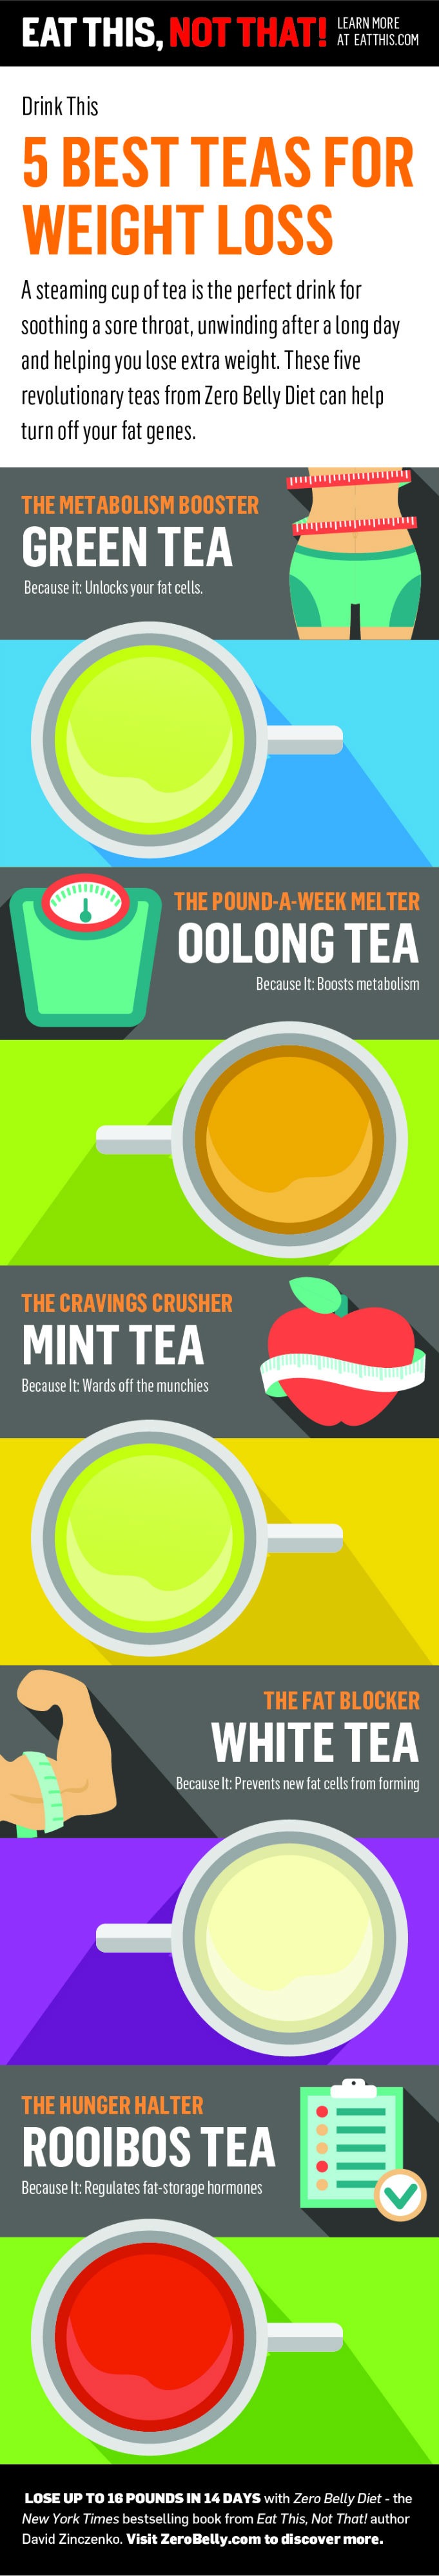 green tea and weight loss infographic